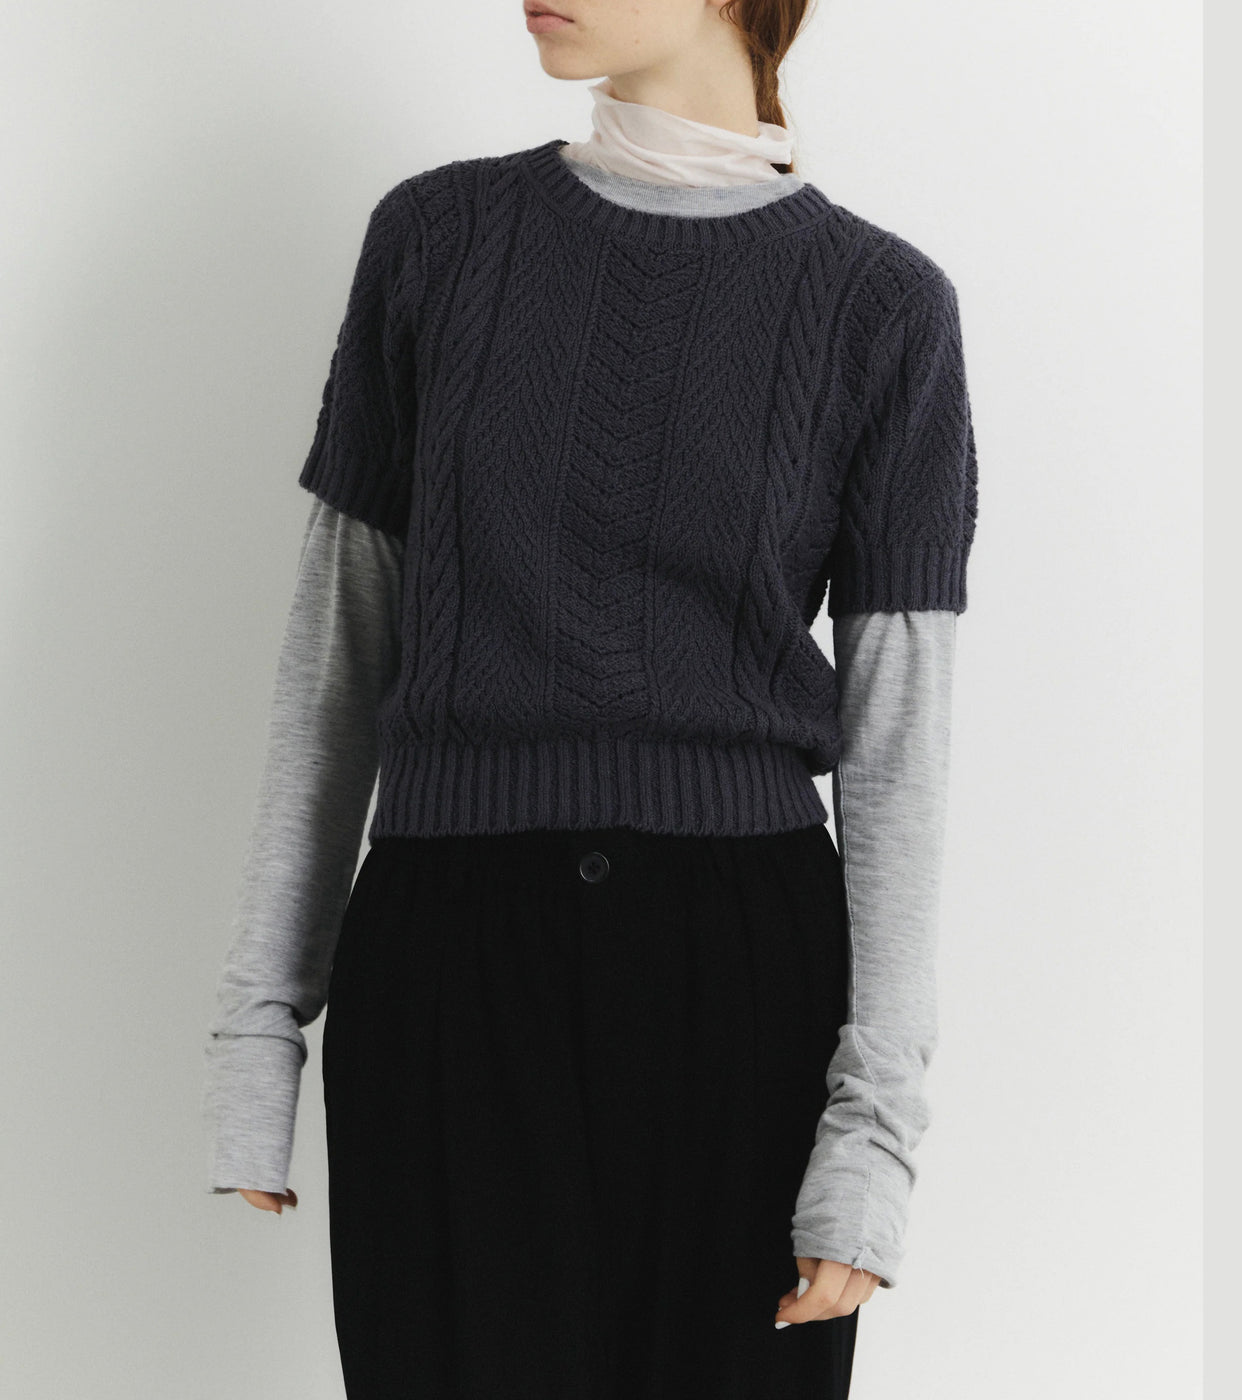 Unfil open work cable-knit sweater, Charcoal Navy